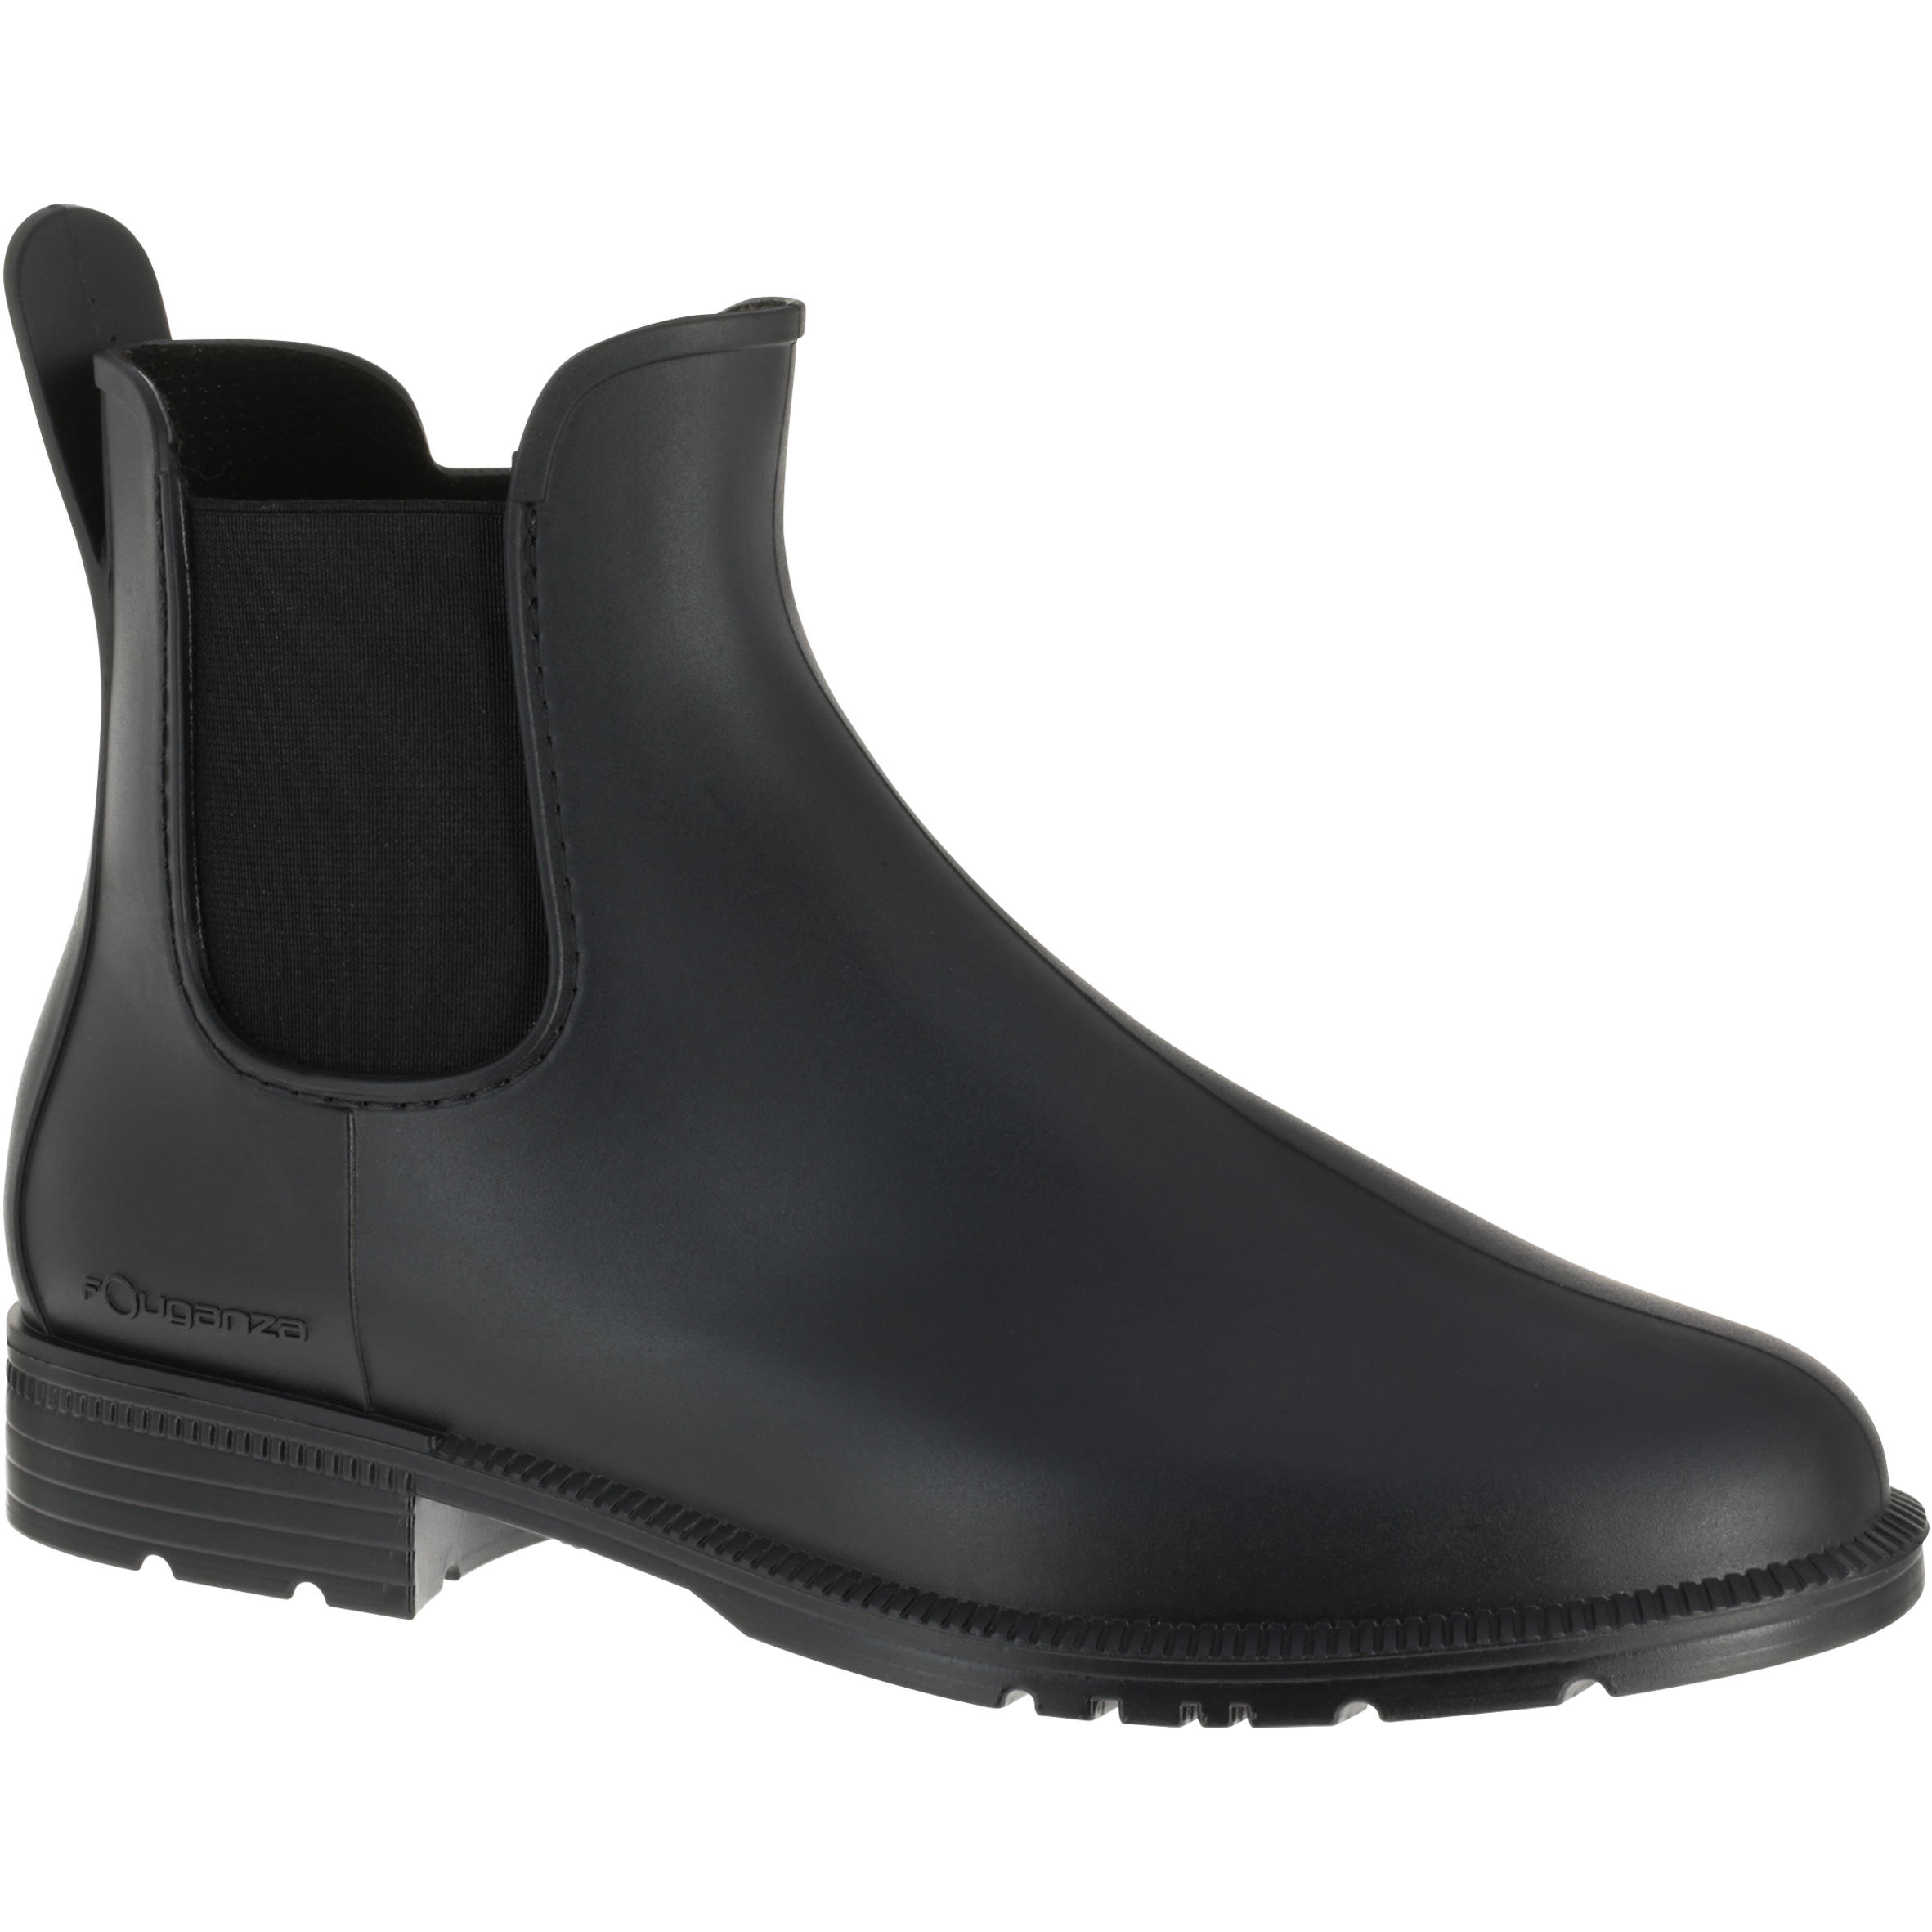 chelsea boots horse riding